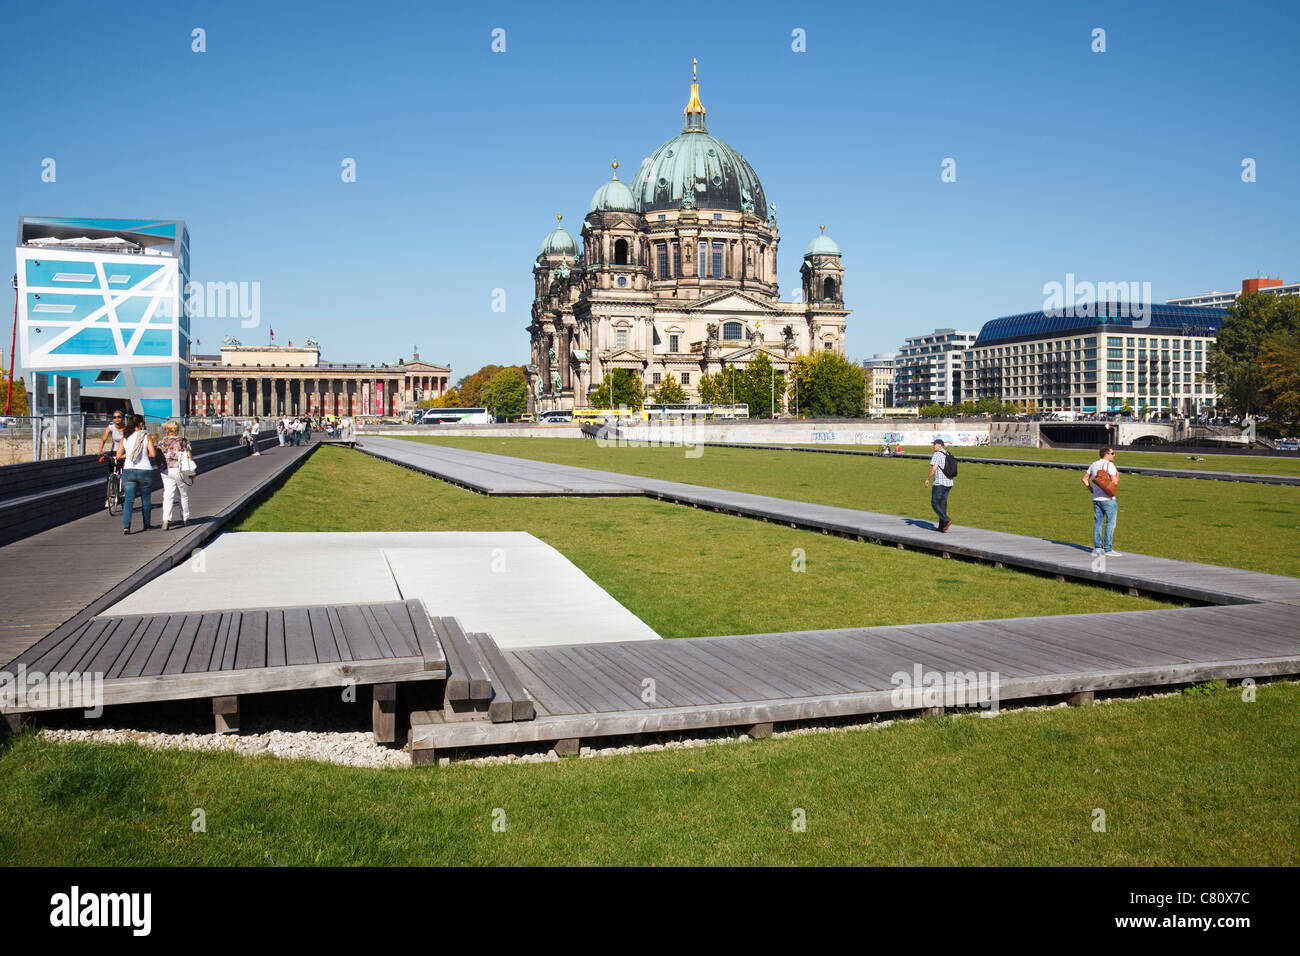 Museum Island from Schlossplatz, with Berliner Dom, Humboldt Box, Alte Nationalgalerie and Altes Museum, Berlin, Germany Stock Photo